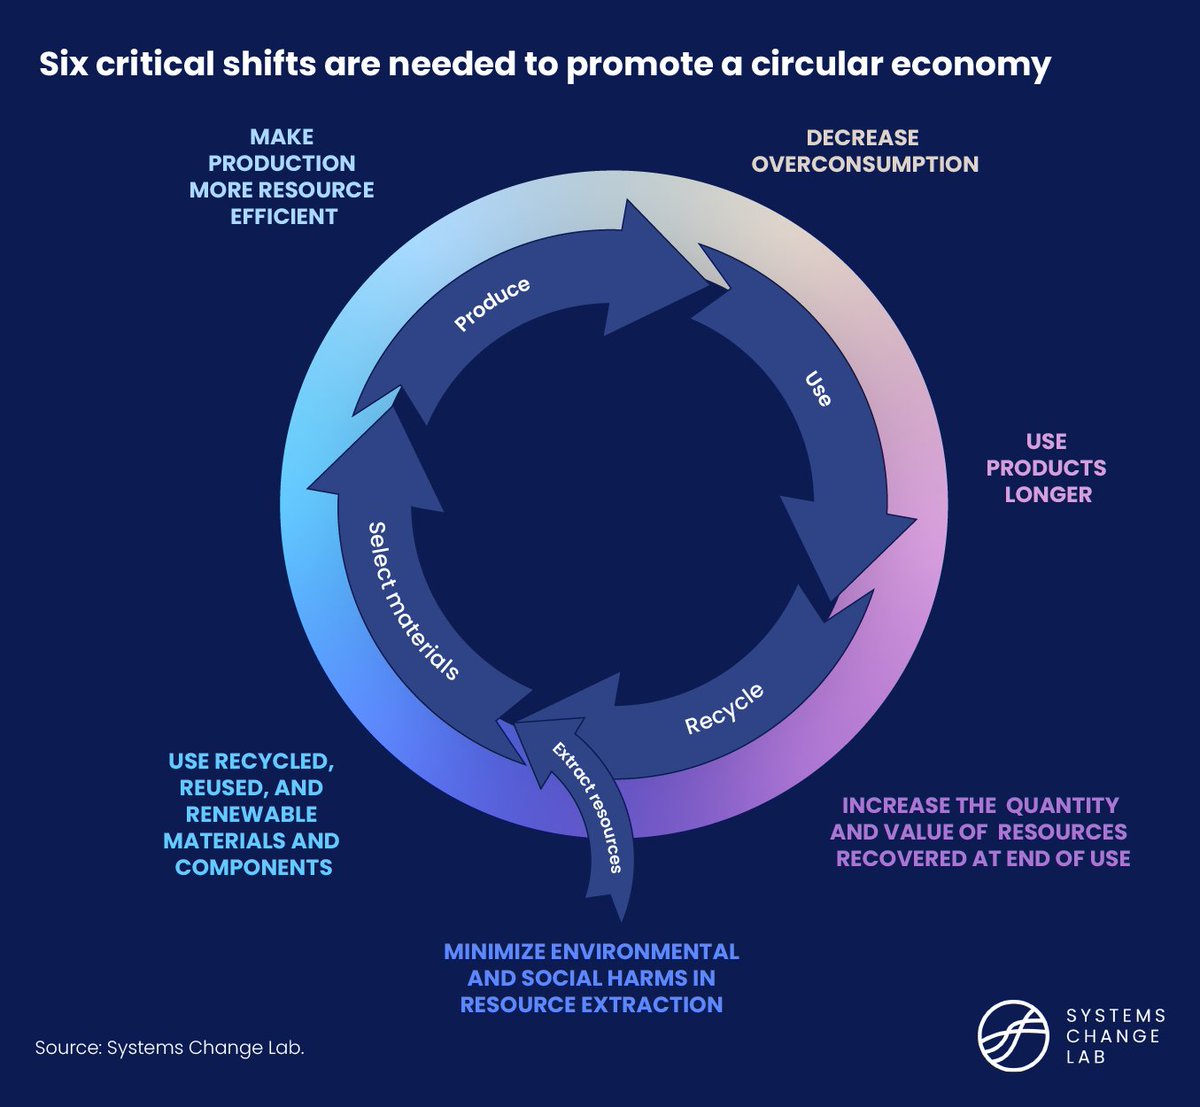 New from #SystemsChangeLab! To promote a circular economy, we need to: - make production more efficient -⬇️overconsumption - use products longer -⬆️amount and value of♻️resources recovered - minimise harms from extraction - use♻️and renewable materials systemschangelab.org/circular-econo…